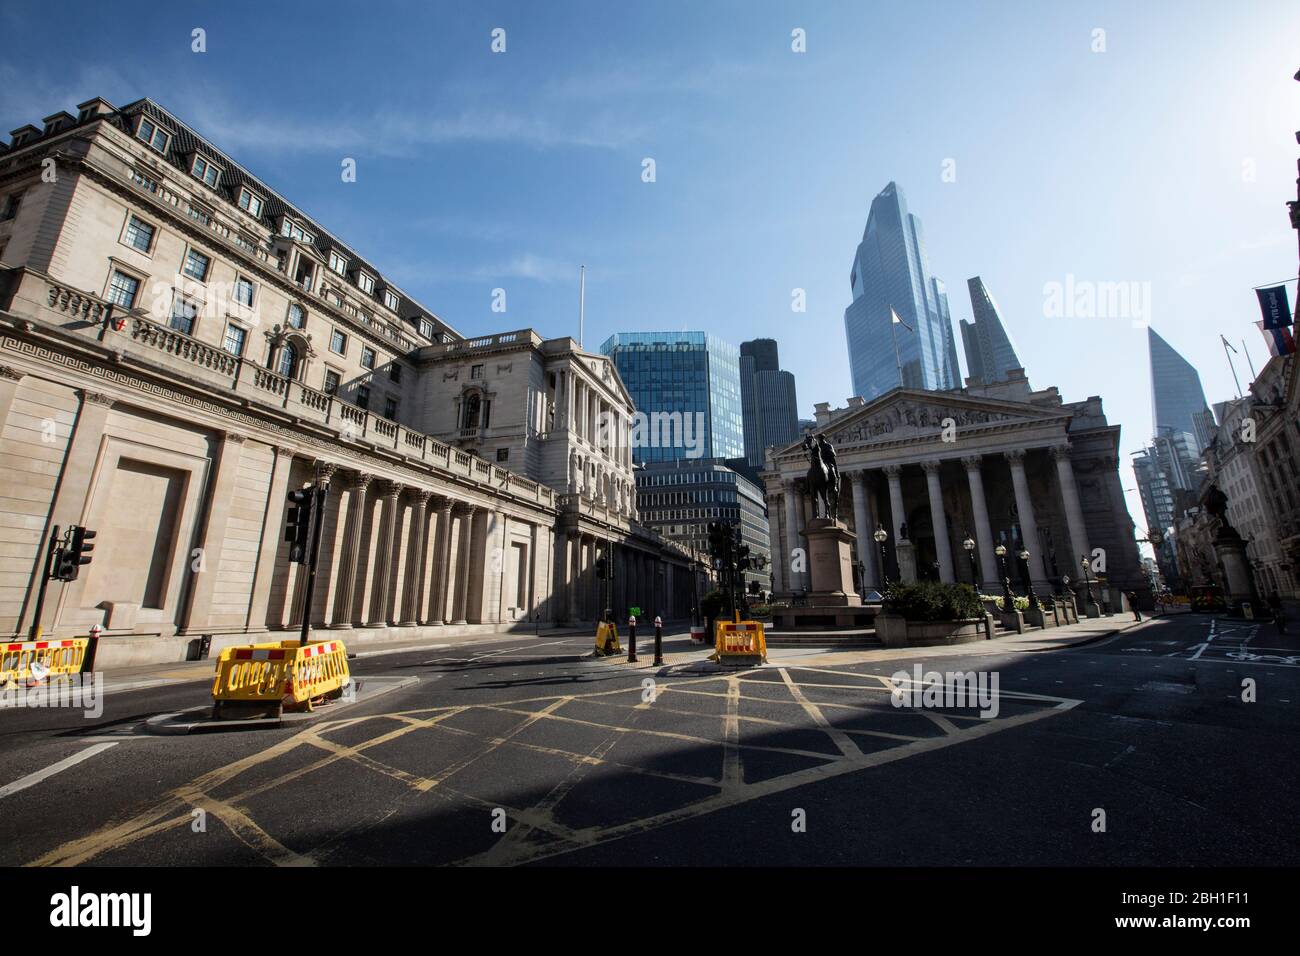 A completely abandoned Bank of England and Royal Exchange early this morning in the heart of the City of London during the coronavirus lockdown, UK Stock Photo